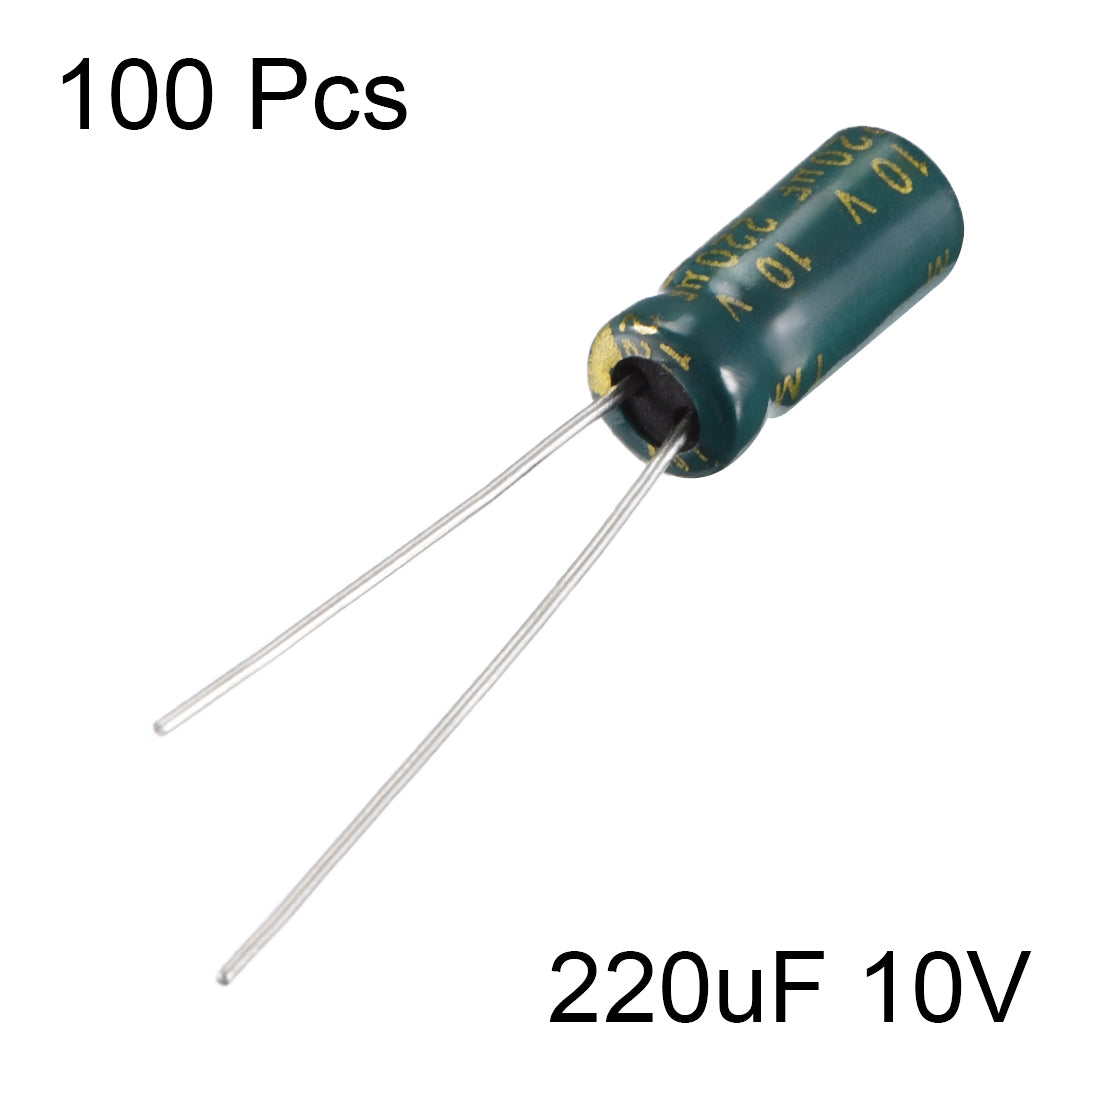 uxcell Uxcell Aluminum Radial Electrolytic Capacitor Low ESR Green with 220uF 10V 105 Celsius Life 3000H 5 x 11mm High Ripple Current,Low Impedance 100pcs